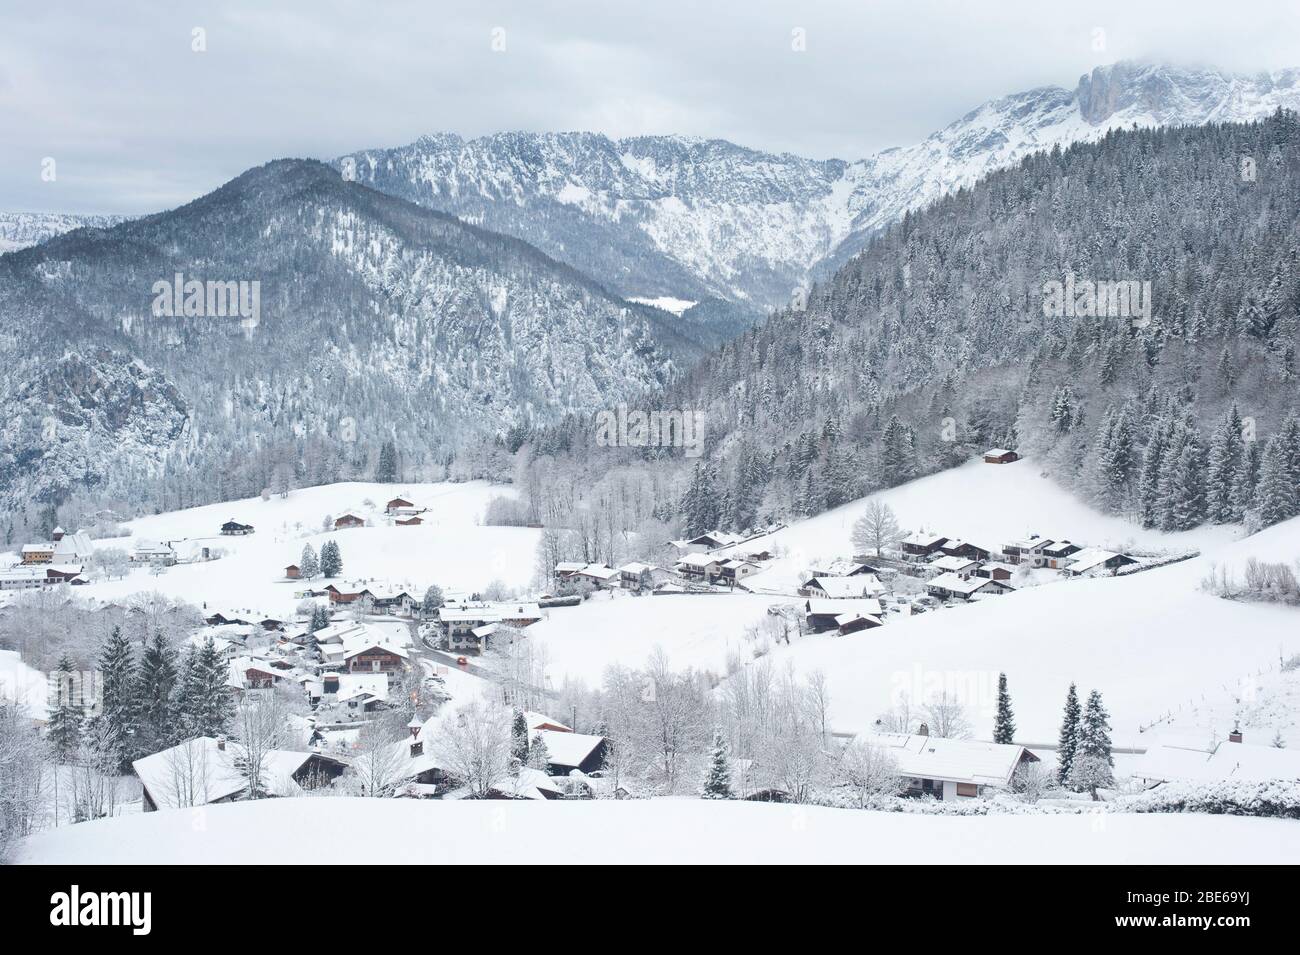 Village surrounded by snow covered mountains and forest, Berchtesgaden, Germany,  Europe Stock Photo